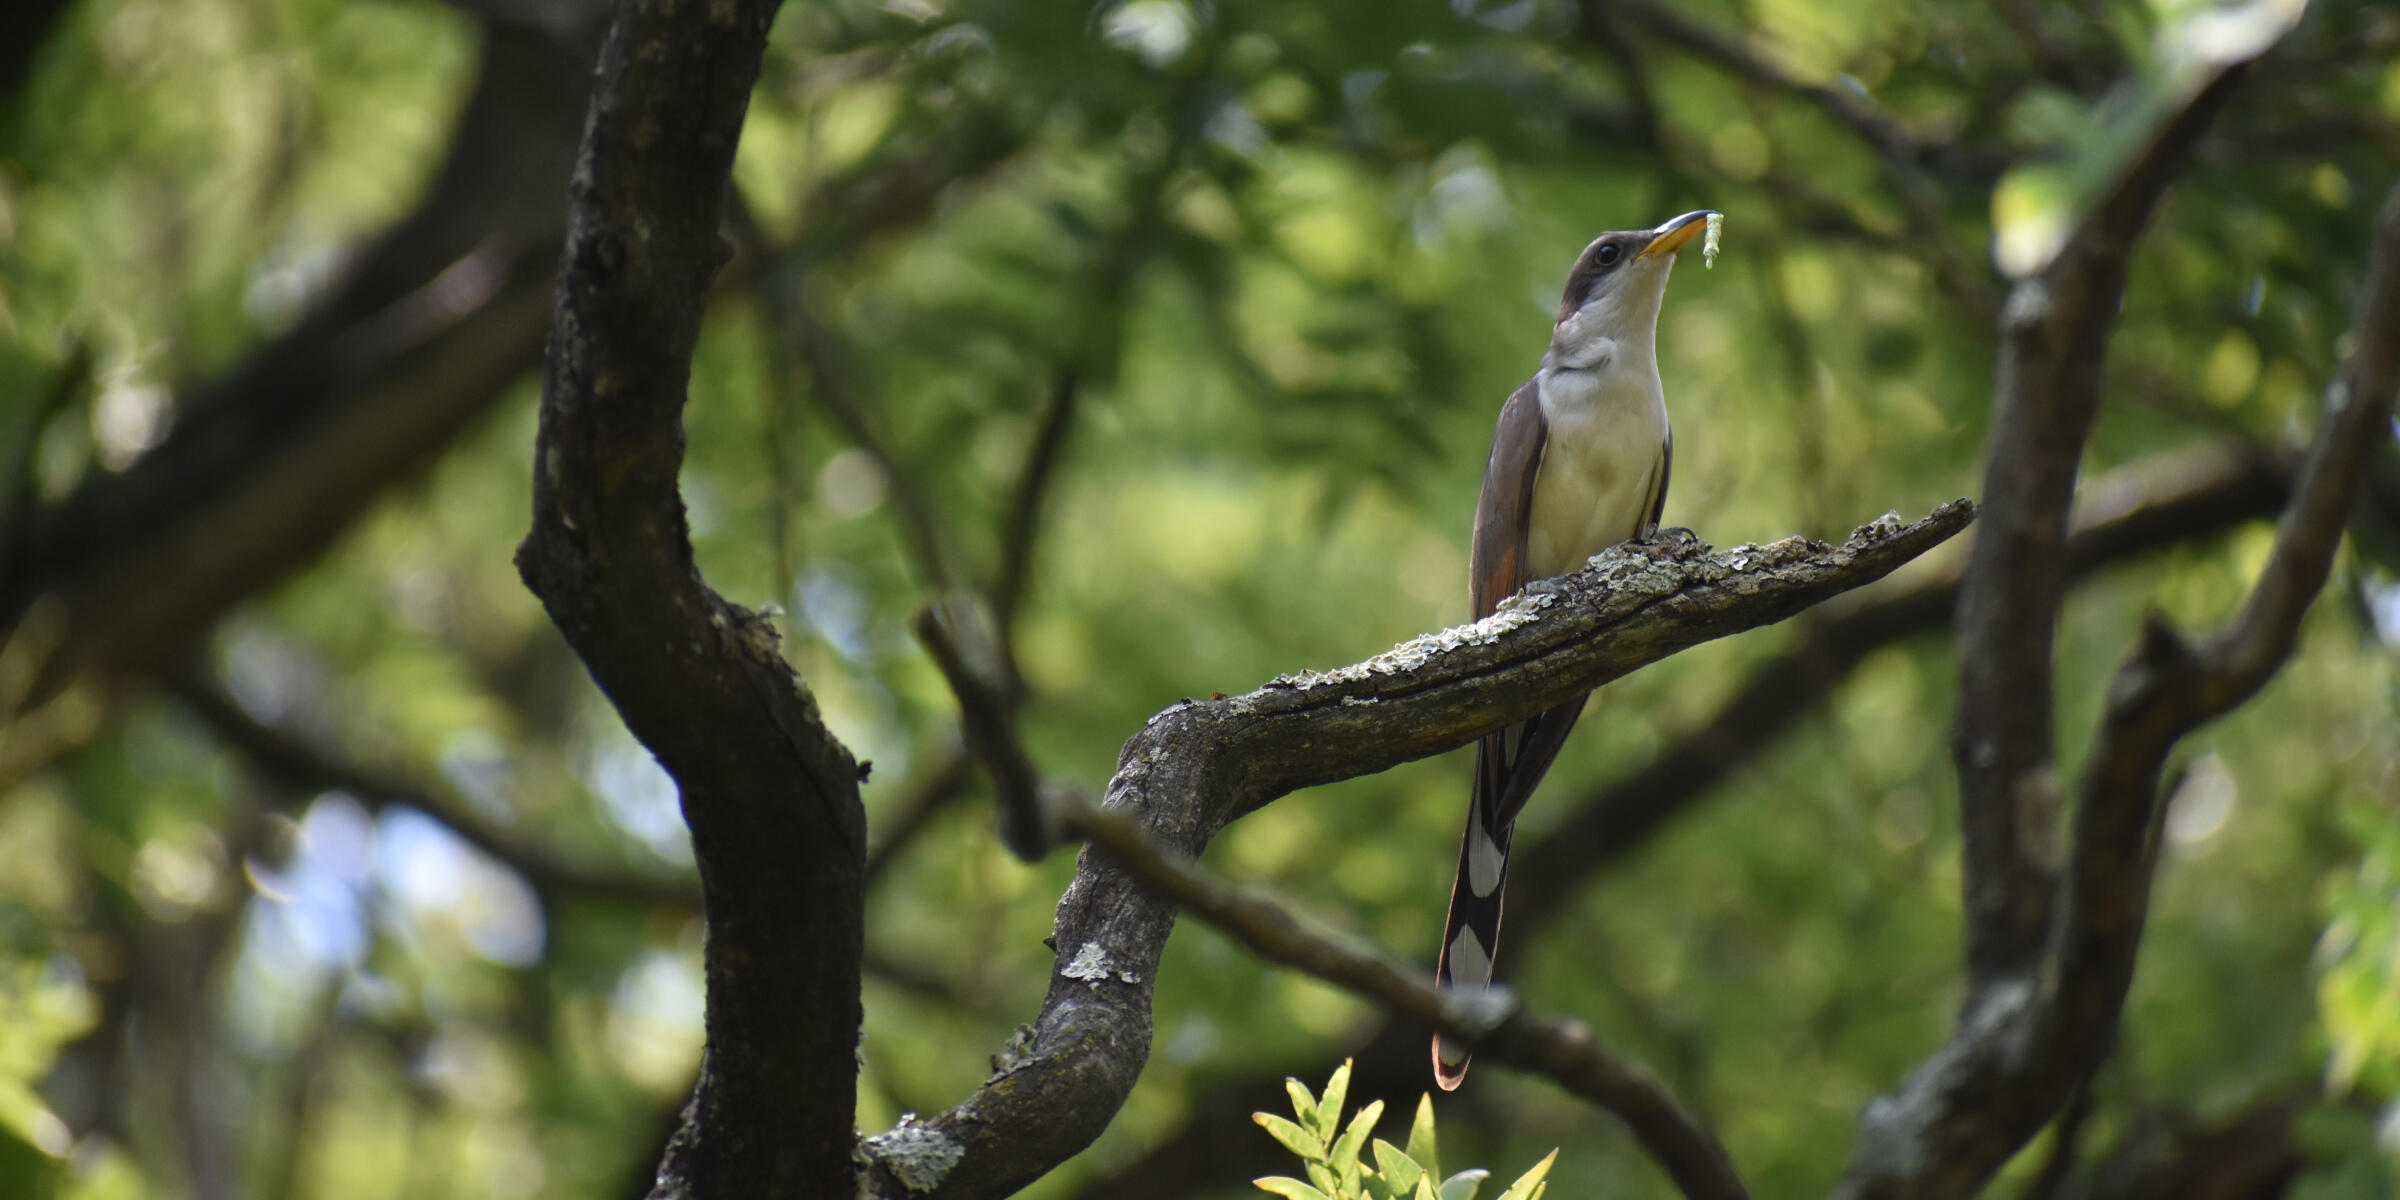 A Yellow-billed Cuckoo perches on a branch with a bug in its beak amidst a lush canopy.